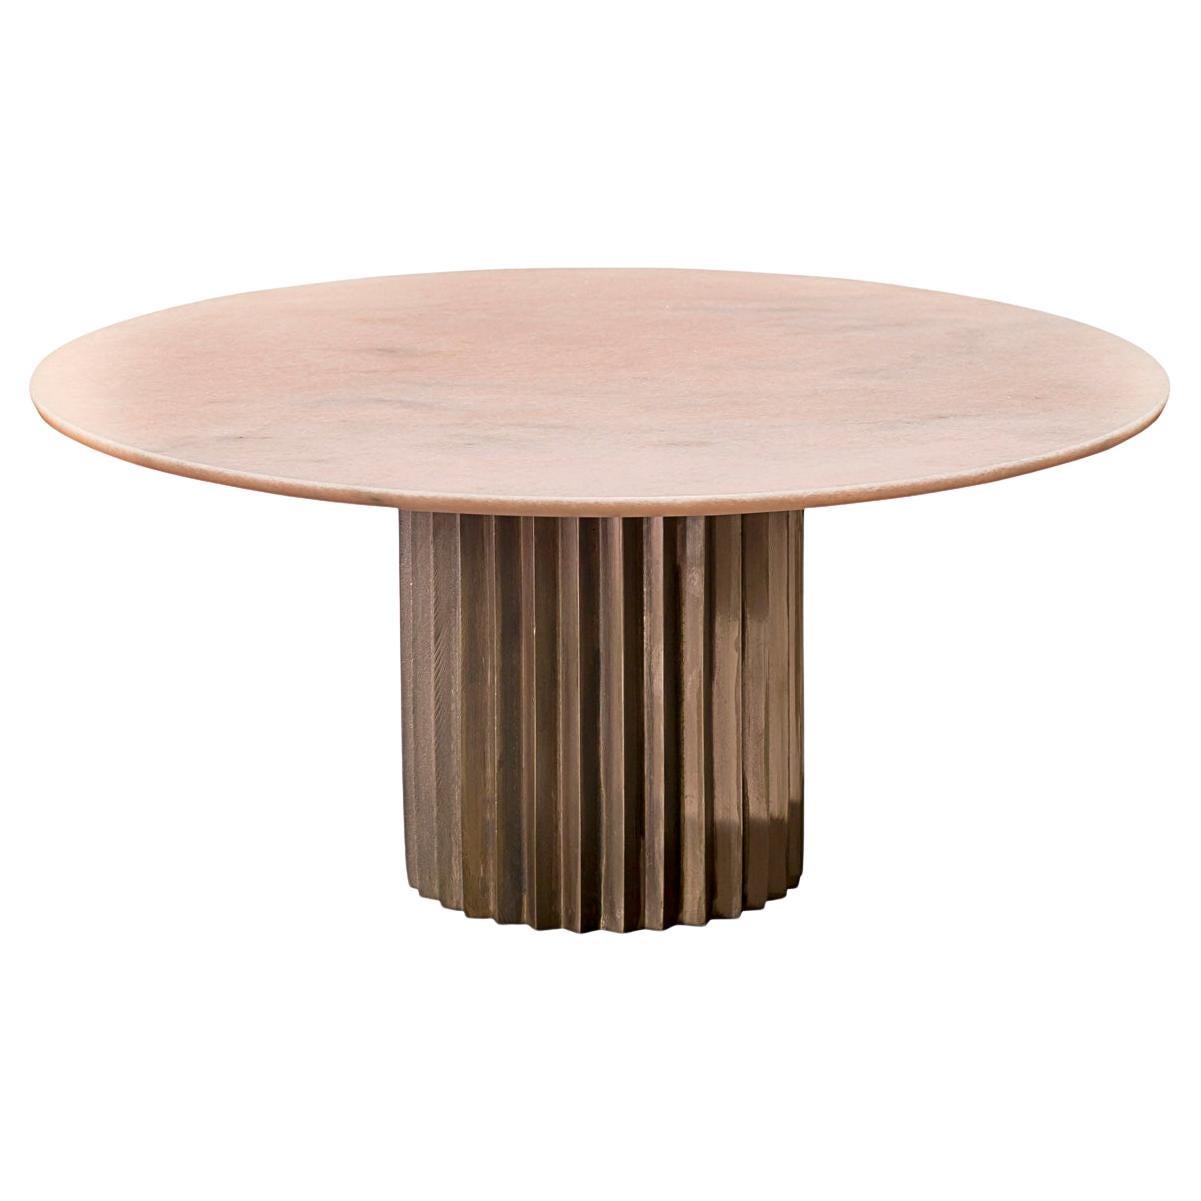 Doris Pink Portugal Marble Round Dining Table by Fred and Juul